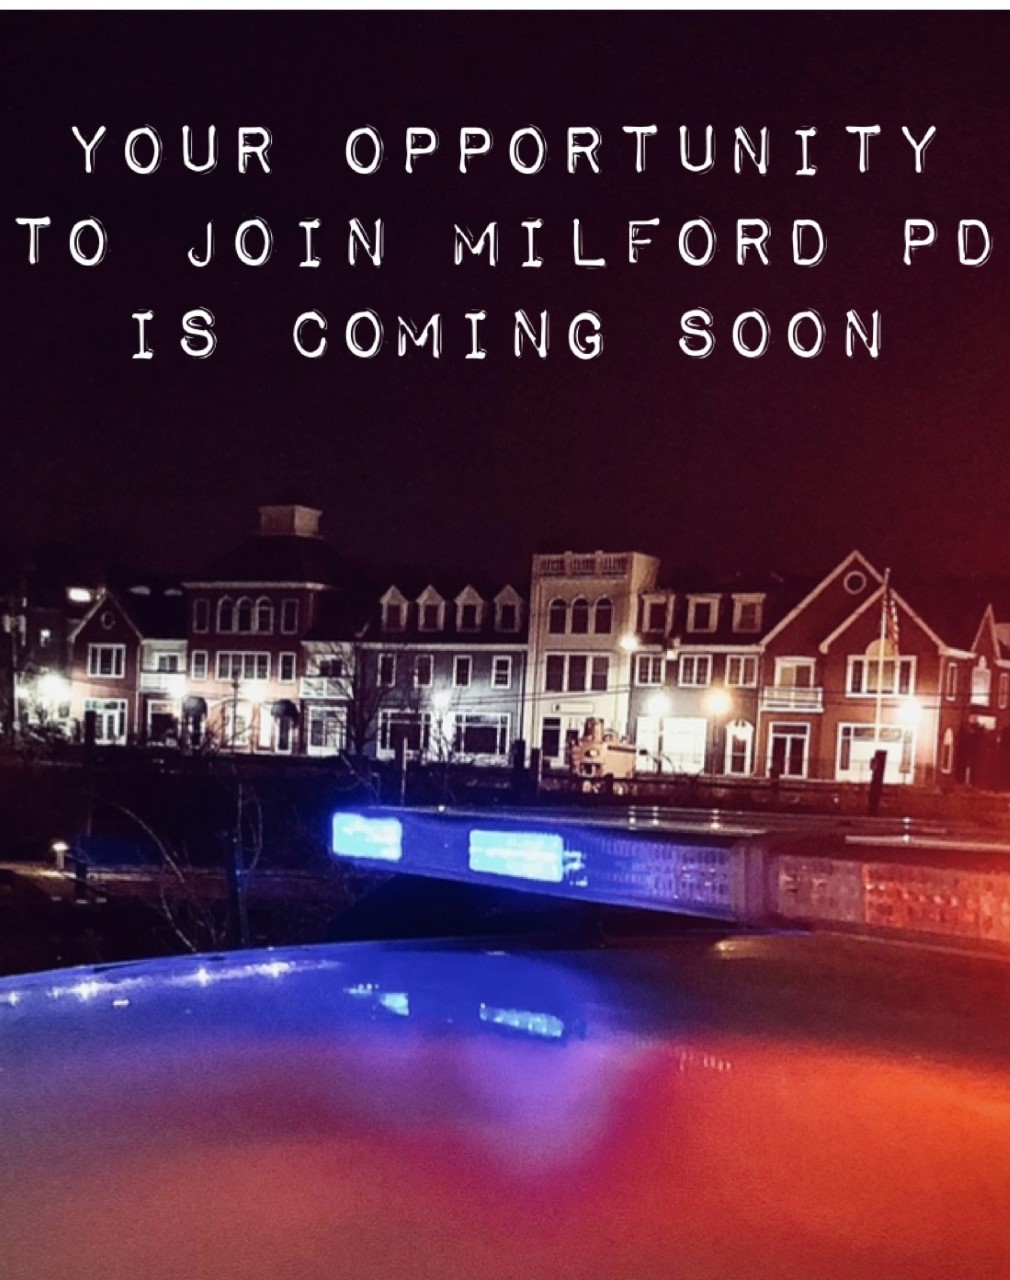 Milford Police Department, CT Police Jobs